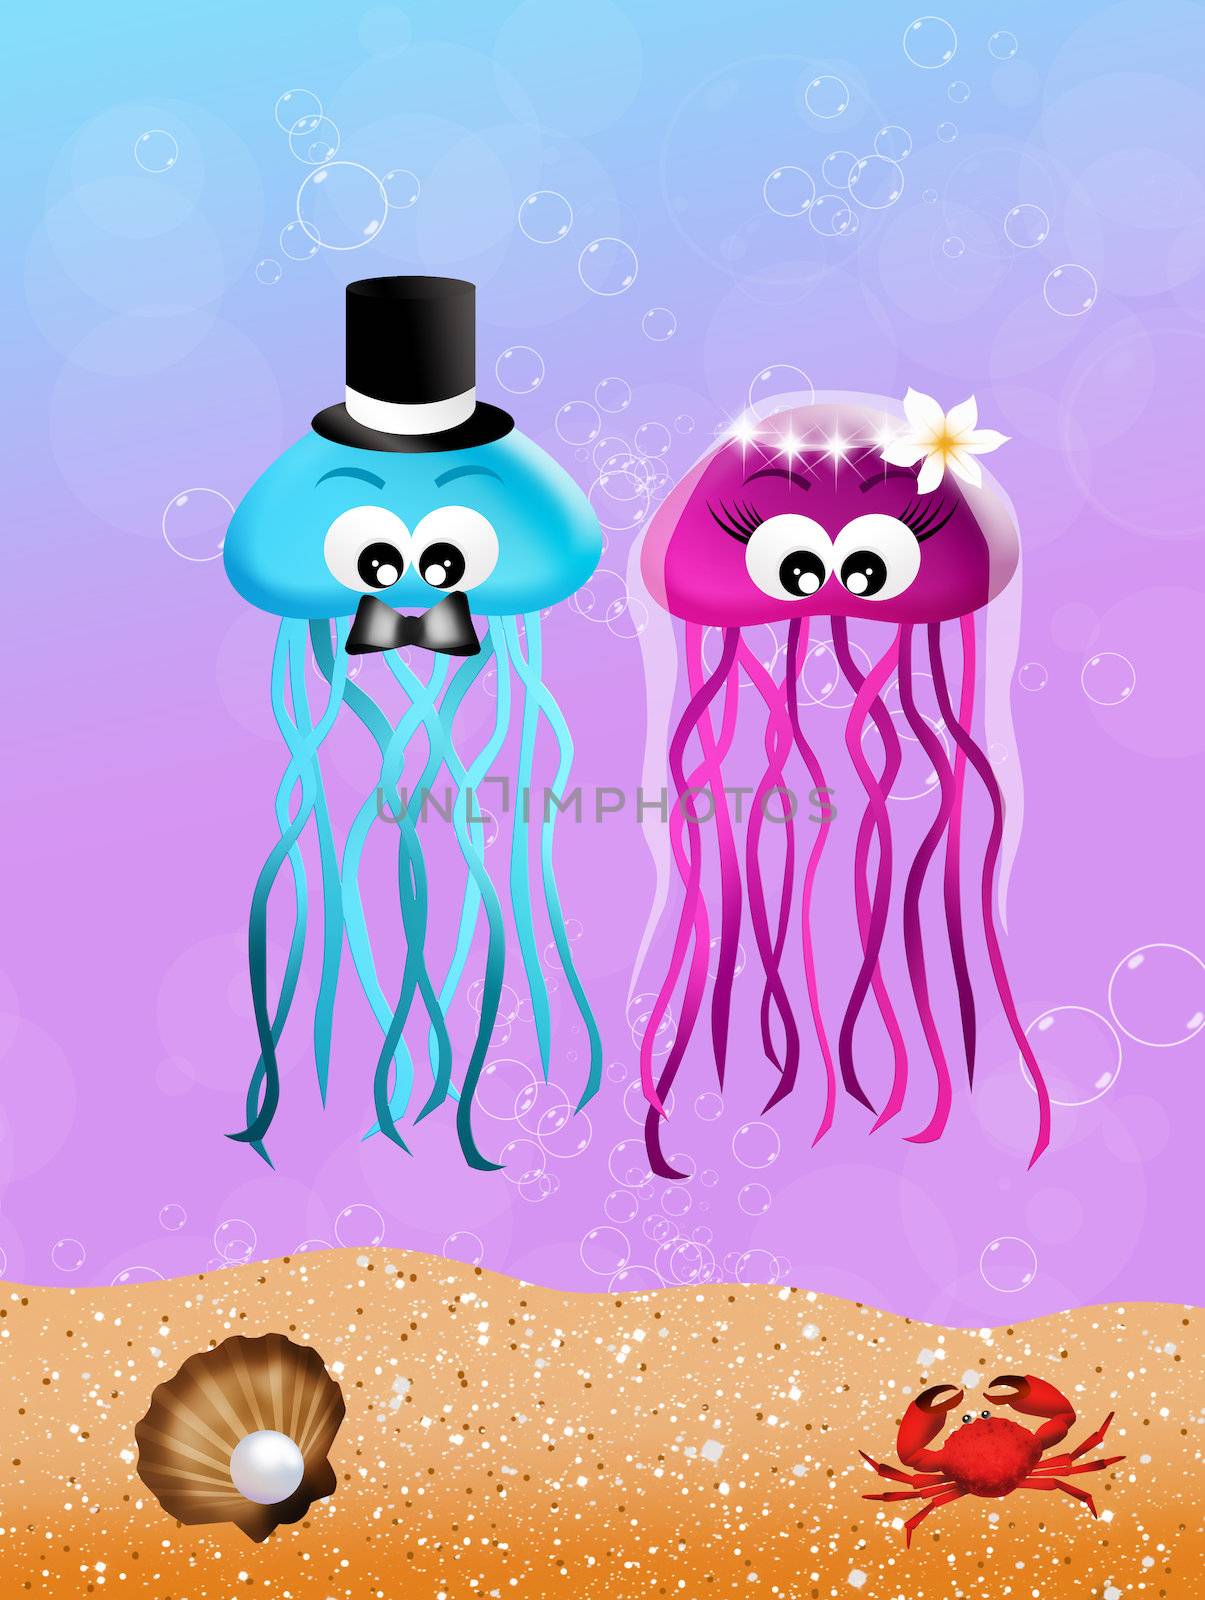 Jellyfishes in love